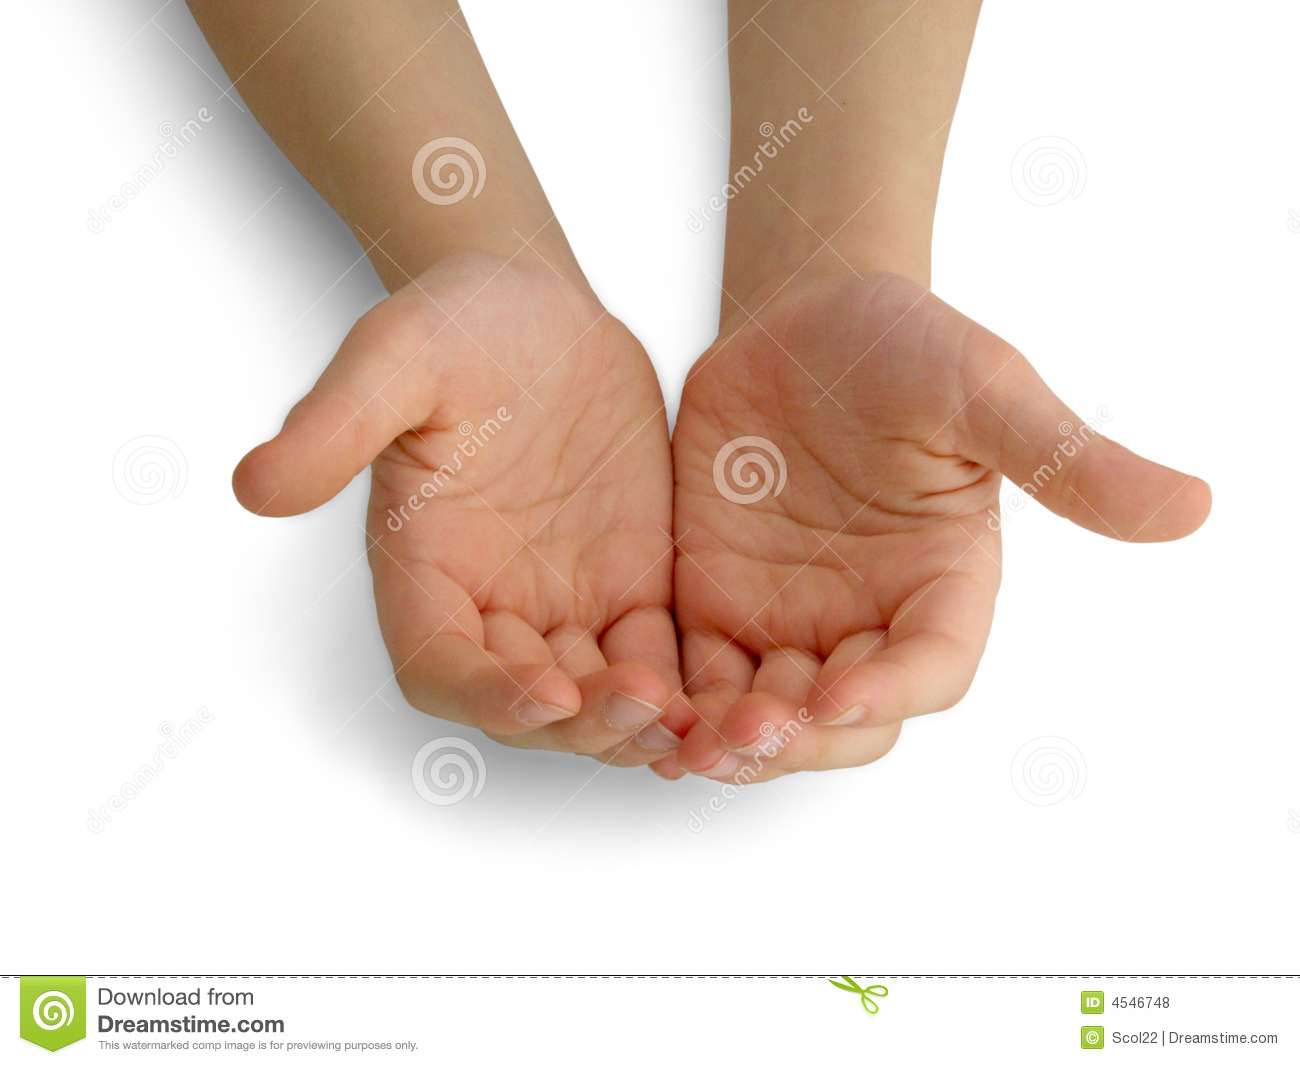 Child S Hands Holding Offering Giving Something Or Asking Begging For    